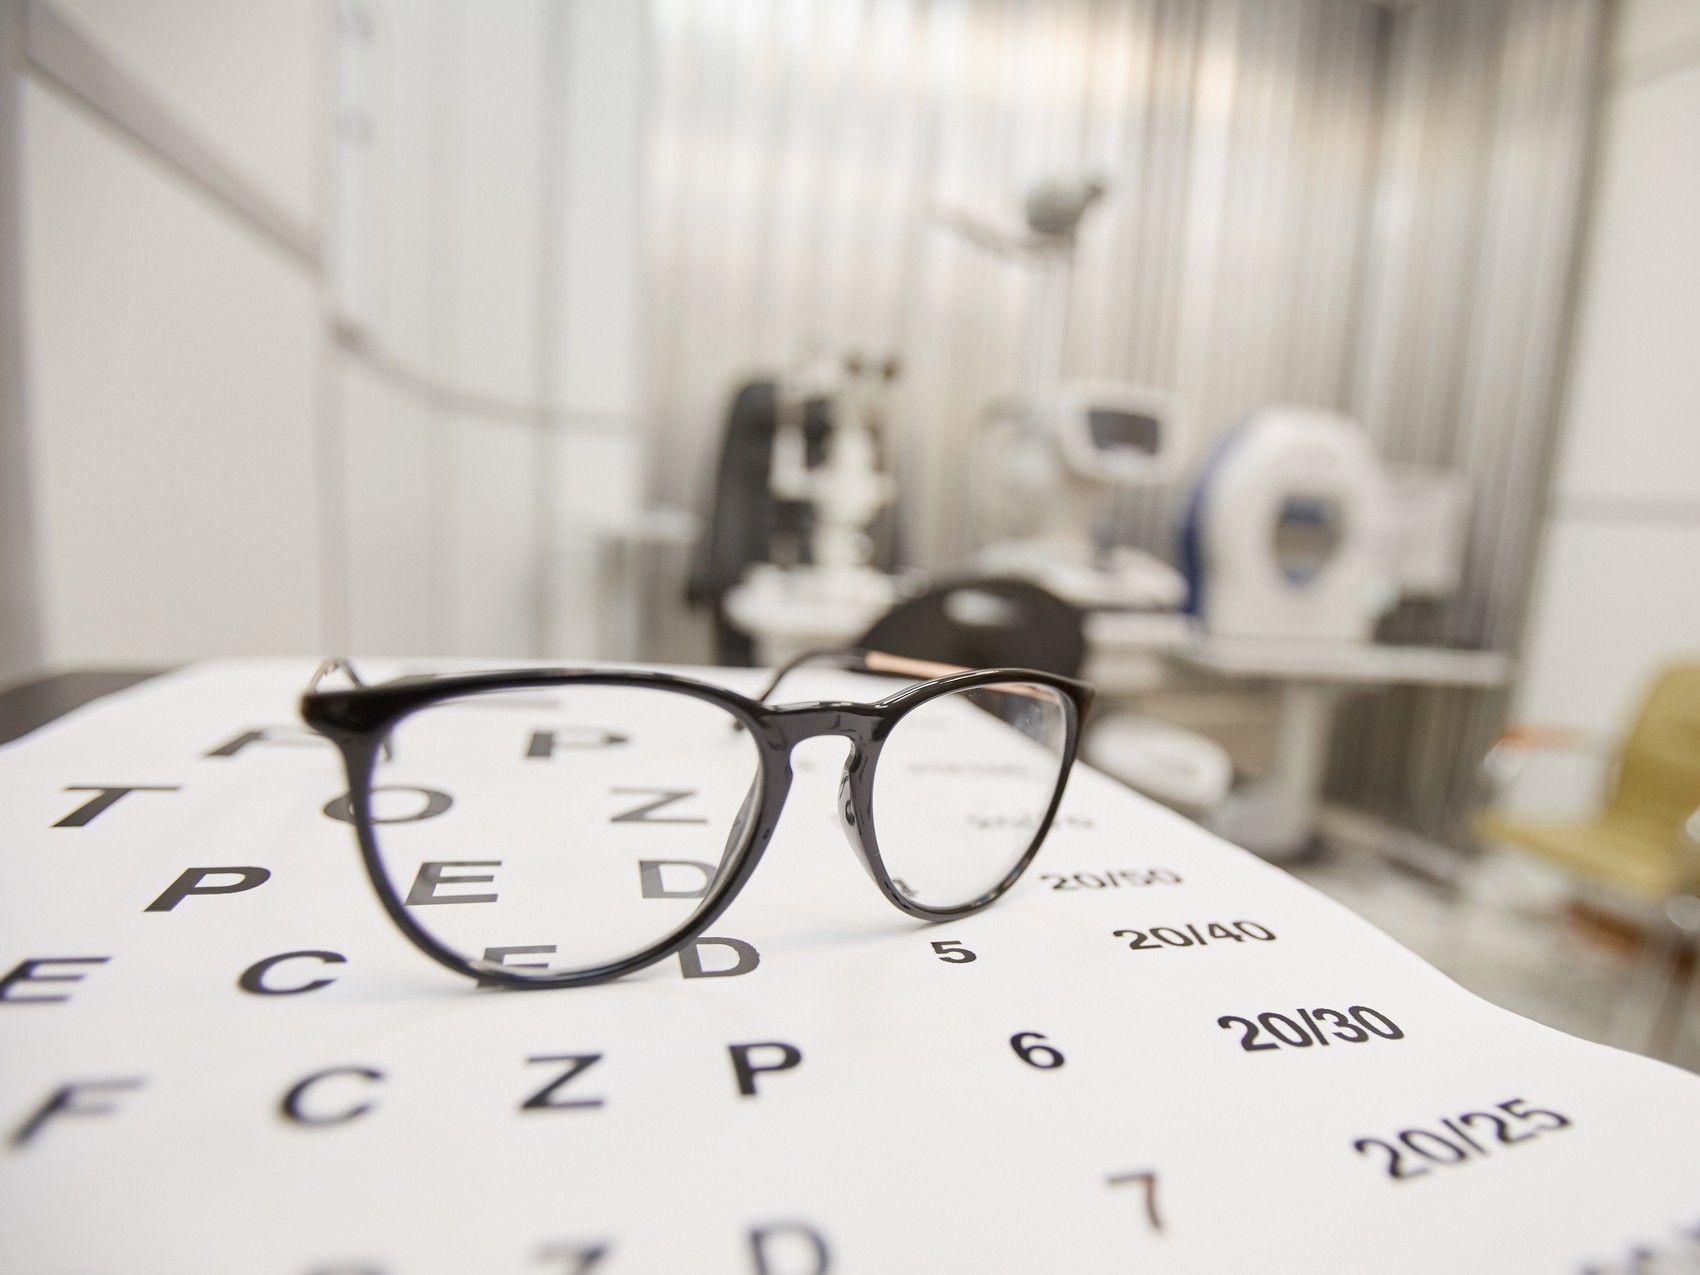 The one-time payment comes after optometrists threatened to stop conducting eye exams.